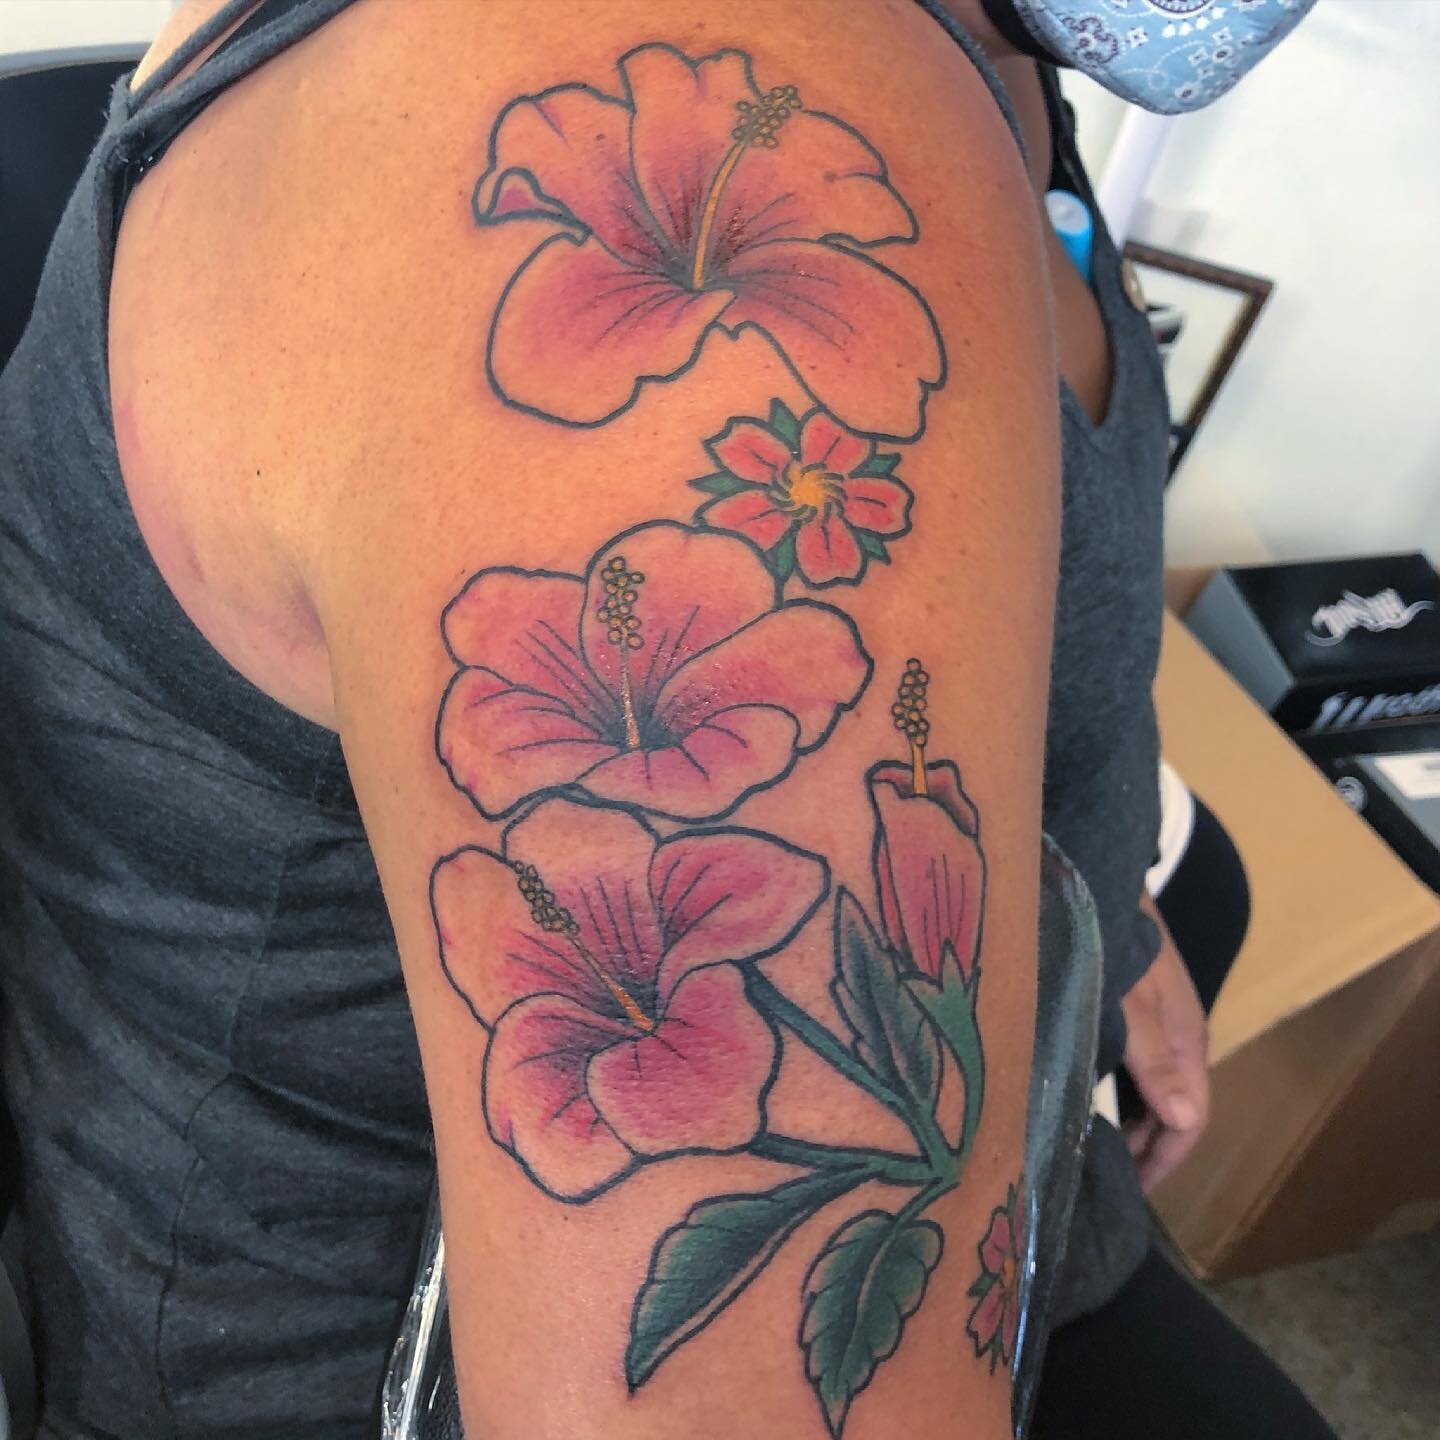 Close up on a hibiscus garden done recently by @unscentedcandles 
*
If you&rsquo;re looking to make an appointment with Jon head on over to his Instagram and send him a DM.
*
#boston #bostontattooartist #supportgoodtattooing #supportgoodtattooers  #b